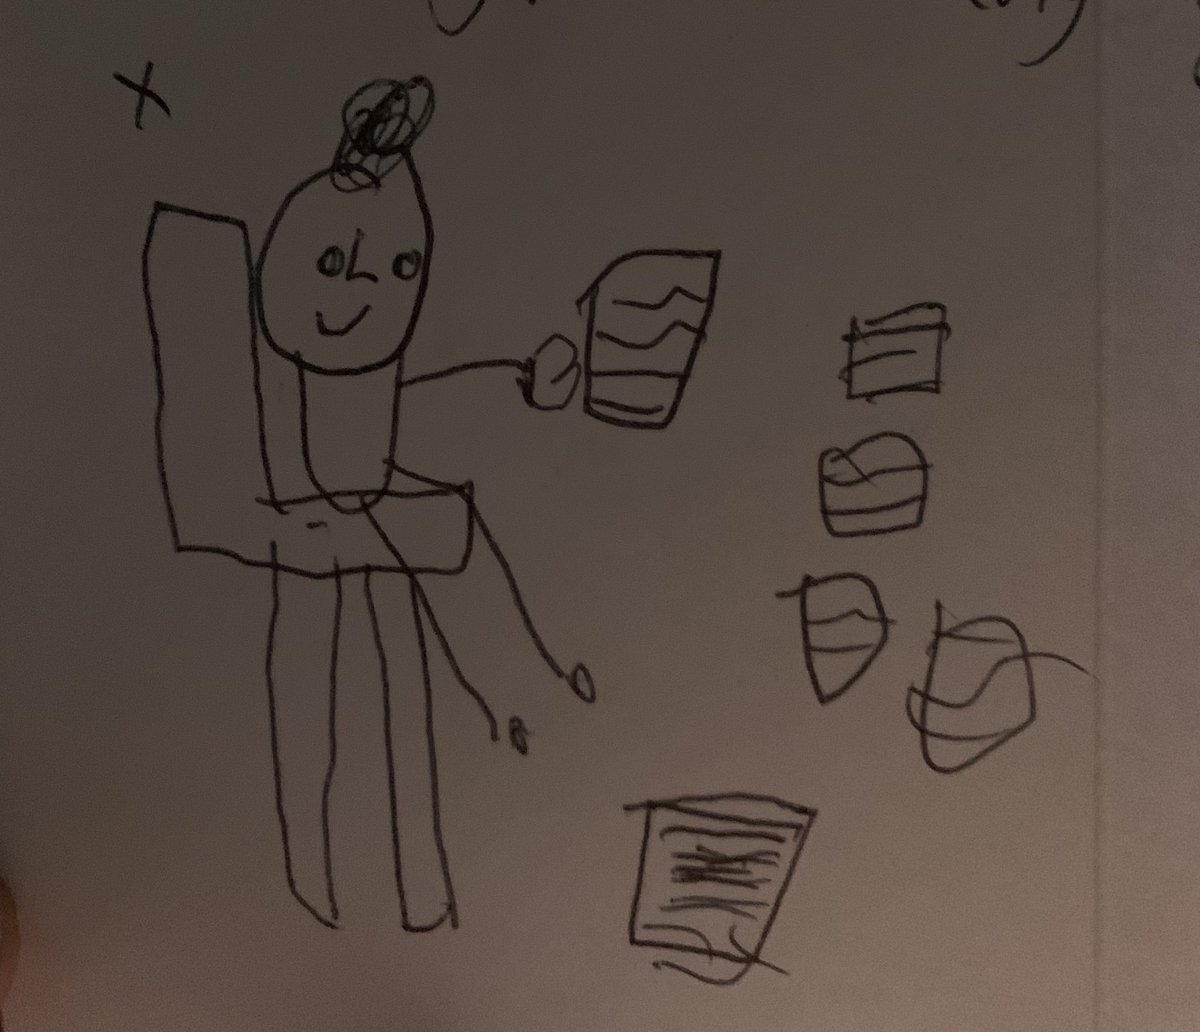 A picture of me ‘writing one of your books’ by my little nephew Looks like I’m throwing a draft in the bin. Accurate. 😅😅😅